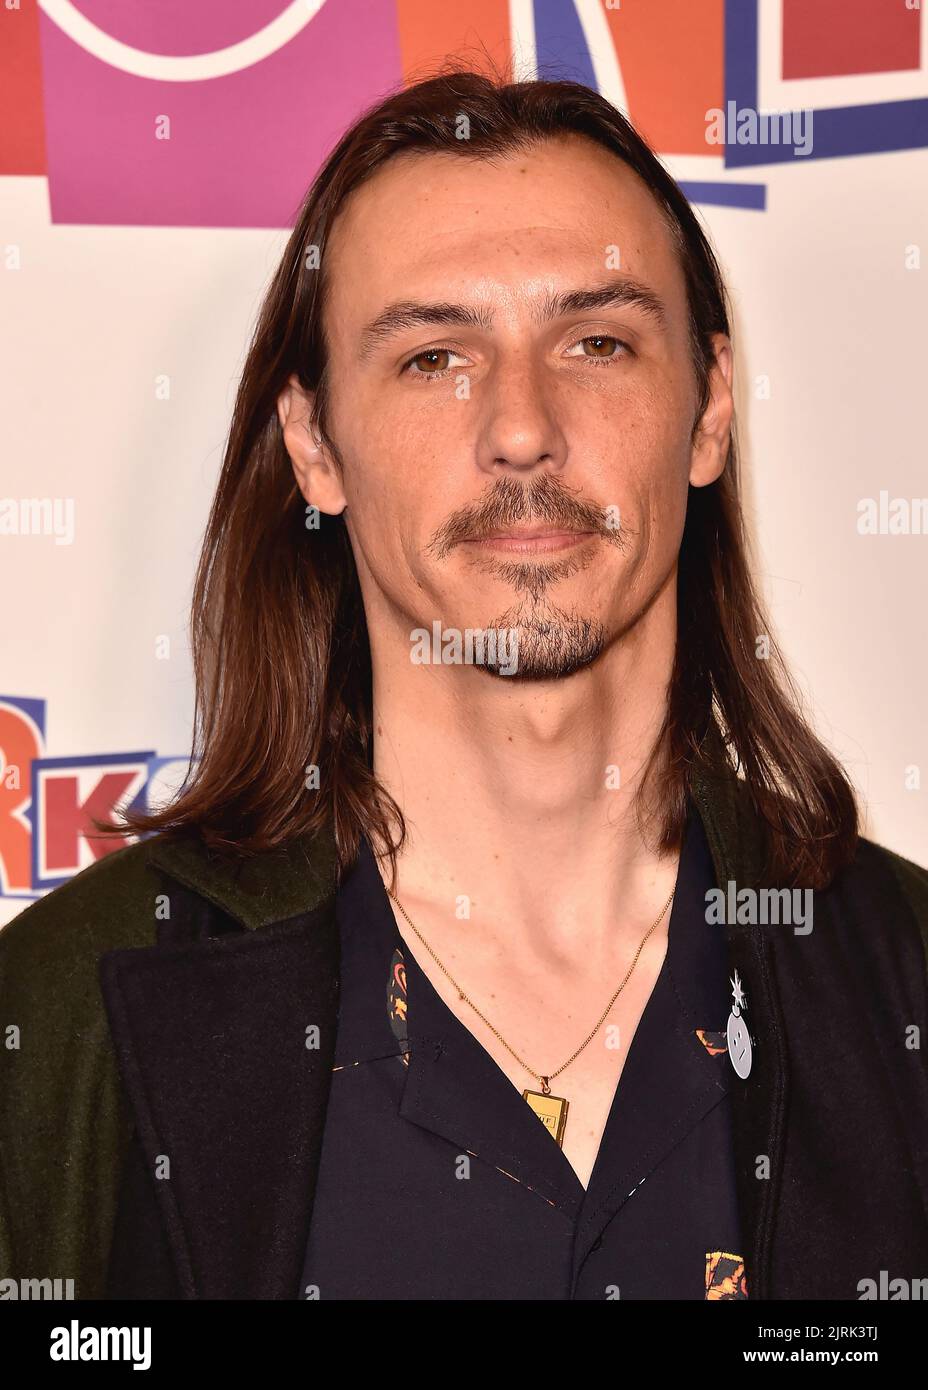 Los Angeles, USA. 24th Aug, 2022. Jake Richardson walking the red carpet at the Los Angeles premiere of 'Clerks III' at TCL Chinese 6 Theatres in Los Angeles, CA on August 24, 2022. (Photo By Scott Kirkland/Sipa USA) Credit: Sipa USA/Alamy Live News Stock Photo